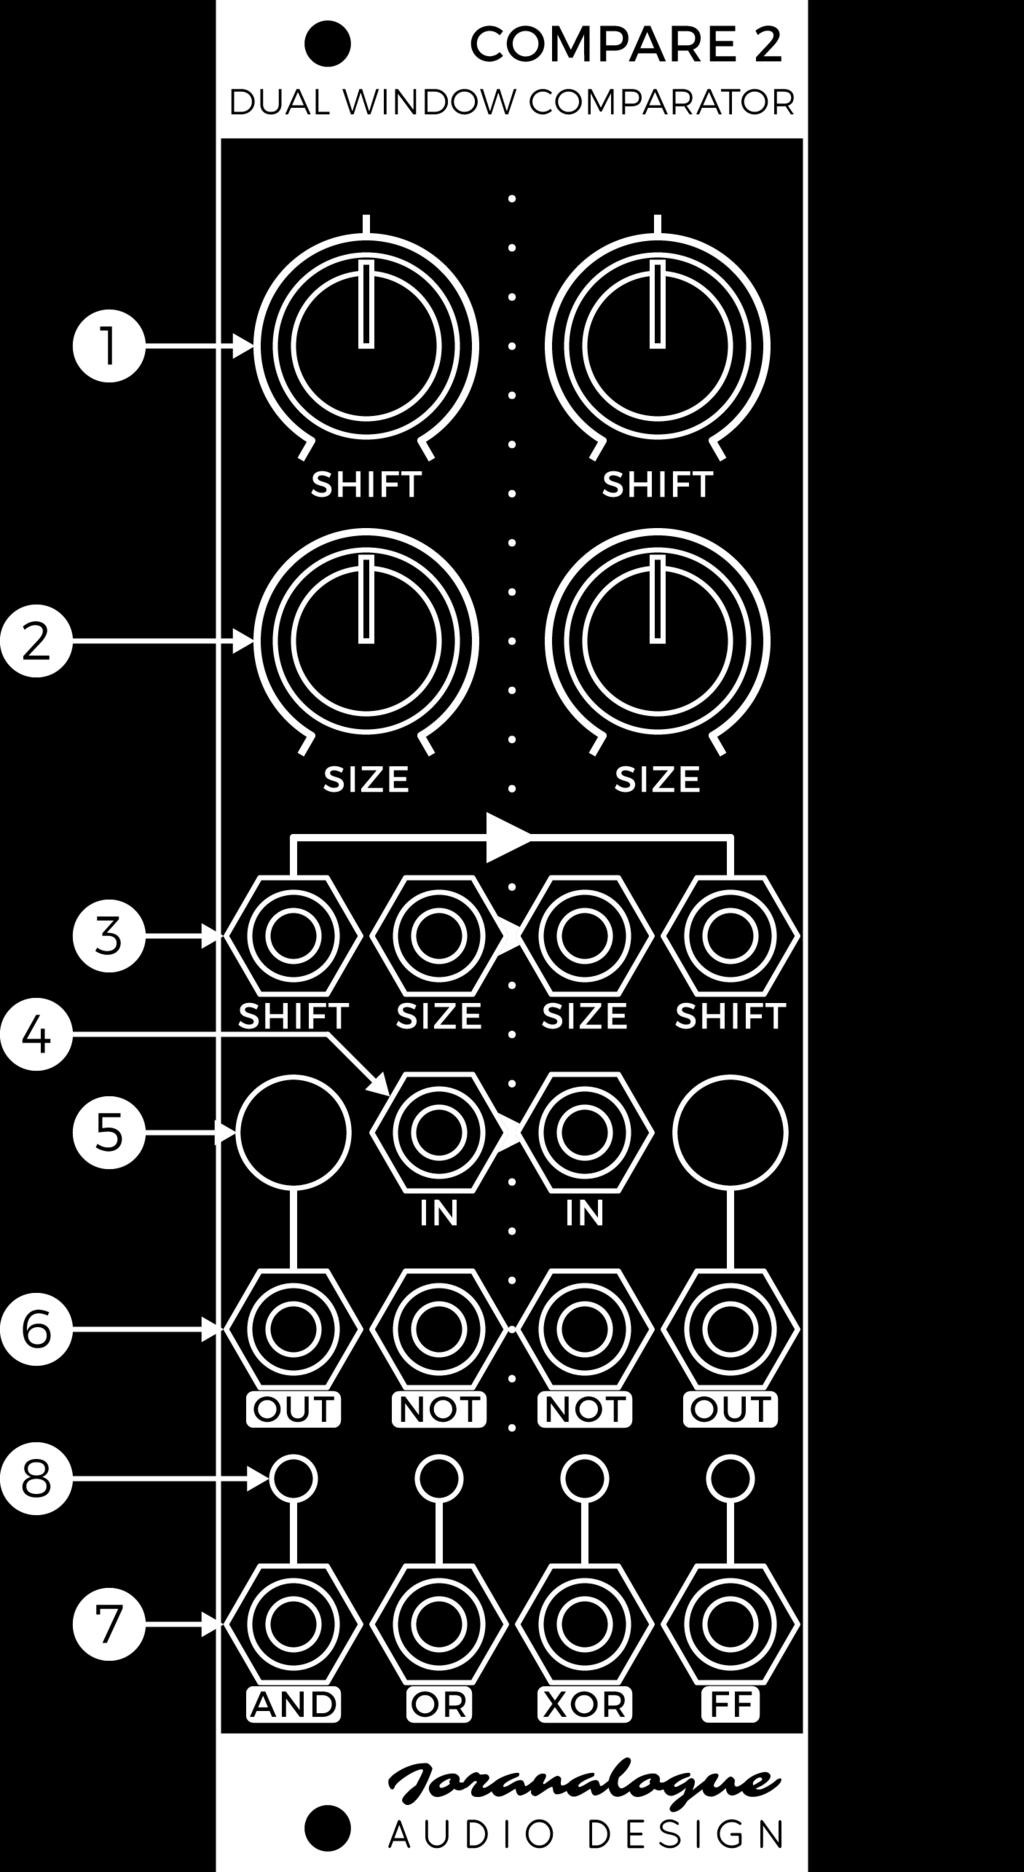 3 SHIFT AND SIZE CV INPUTS The windows can be independently modulated using these CV inputs. The modulation voltages are then added to the knob settings to generate the final detection windows.